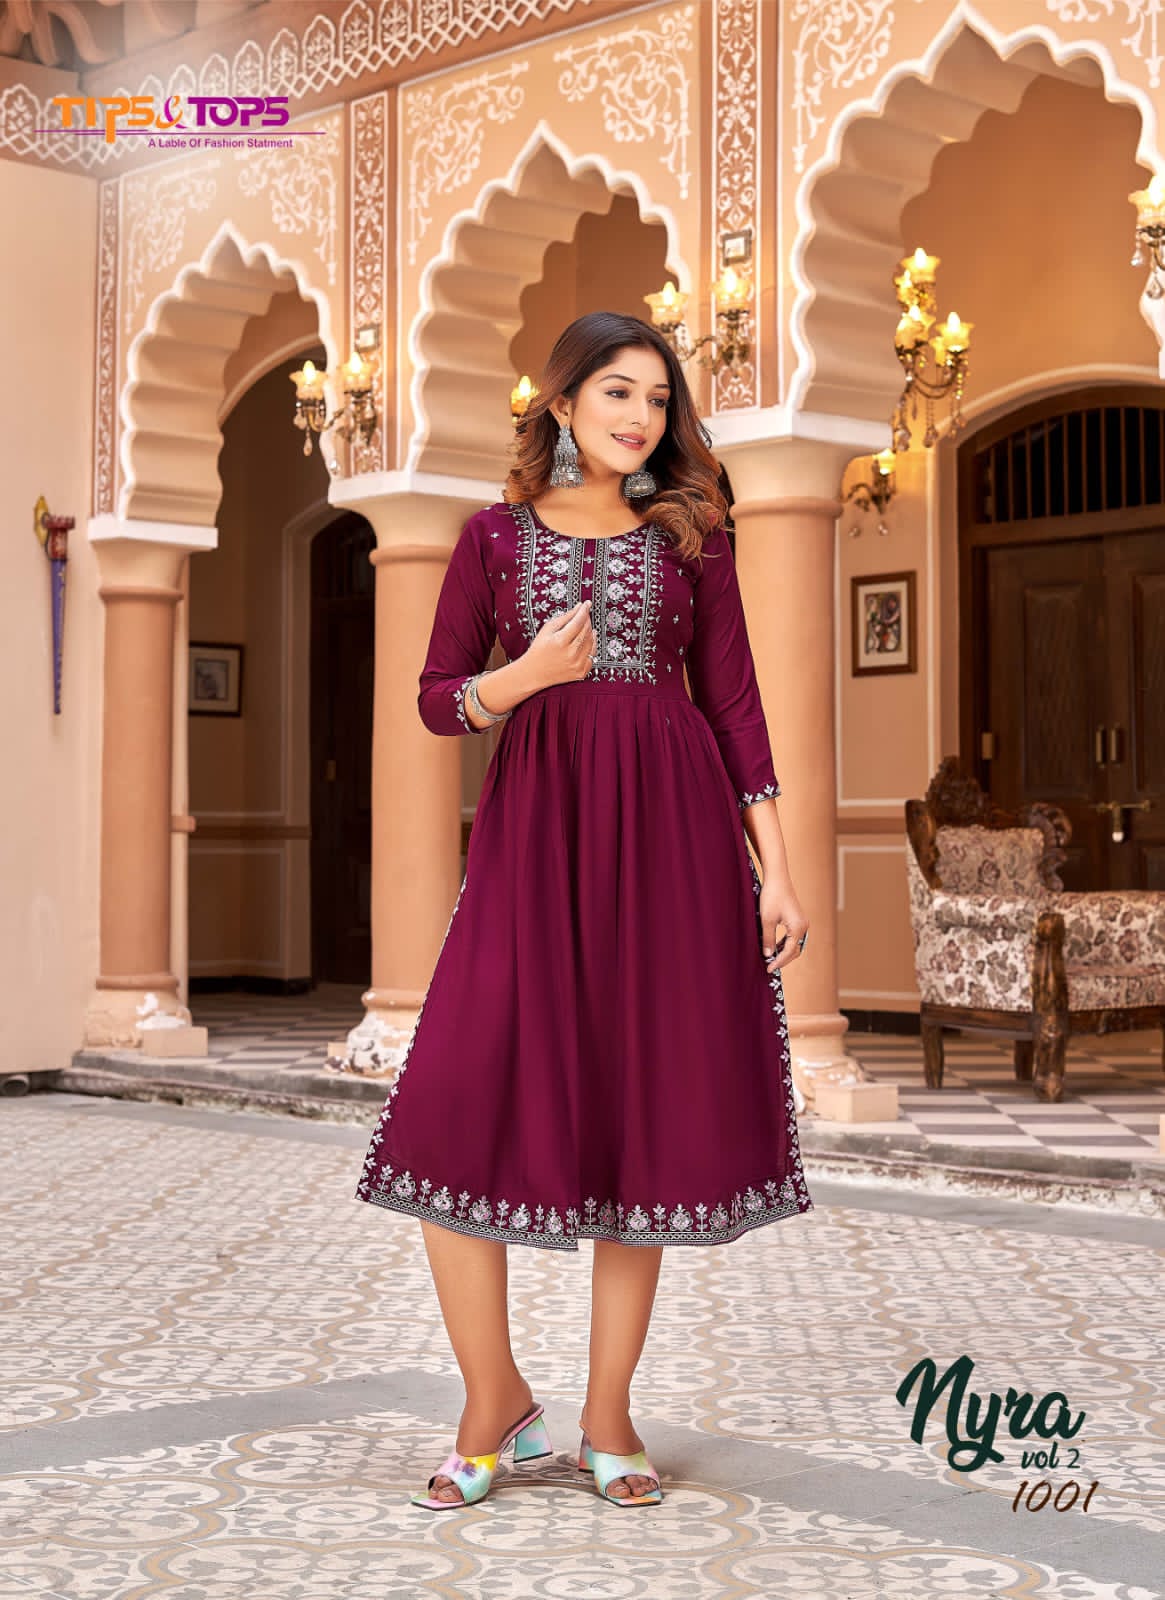 Top more than 73 wholesale tops and kurtis super hot